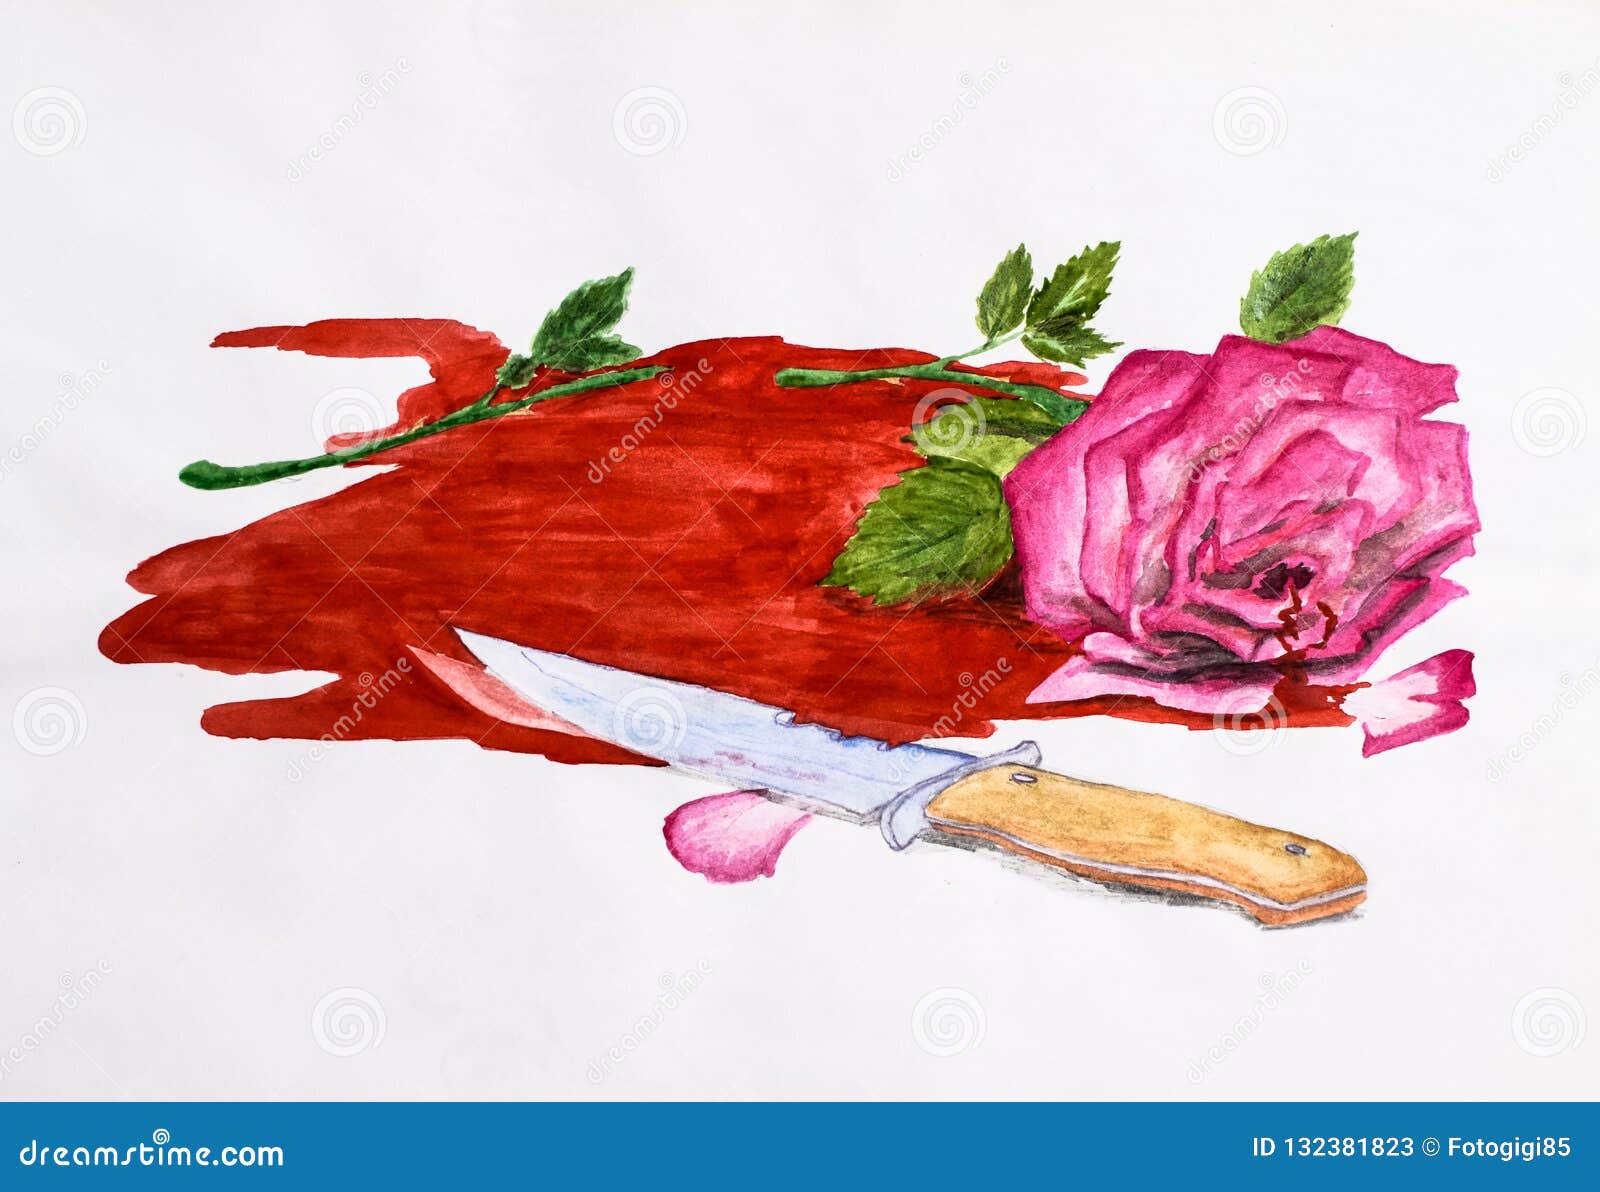 Drawing Watercolor Rose Flower And A Knife In The Blood A Pool Of Blood Stock Illustration Illustration Of Brush Cartoon 132381823